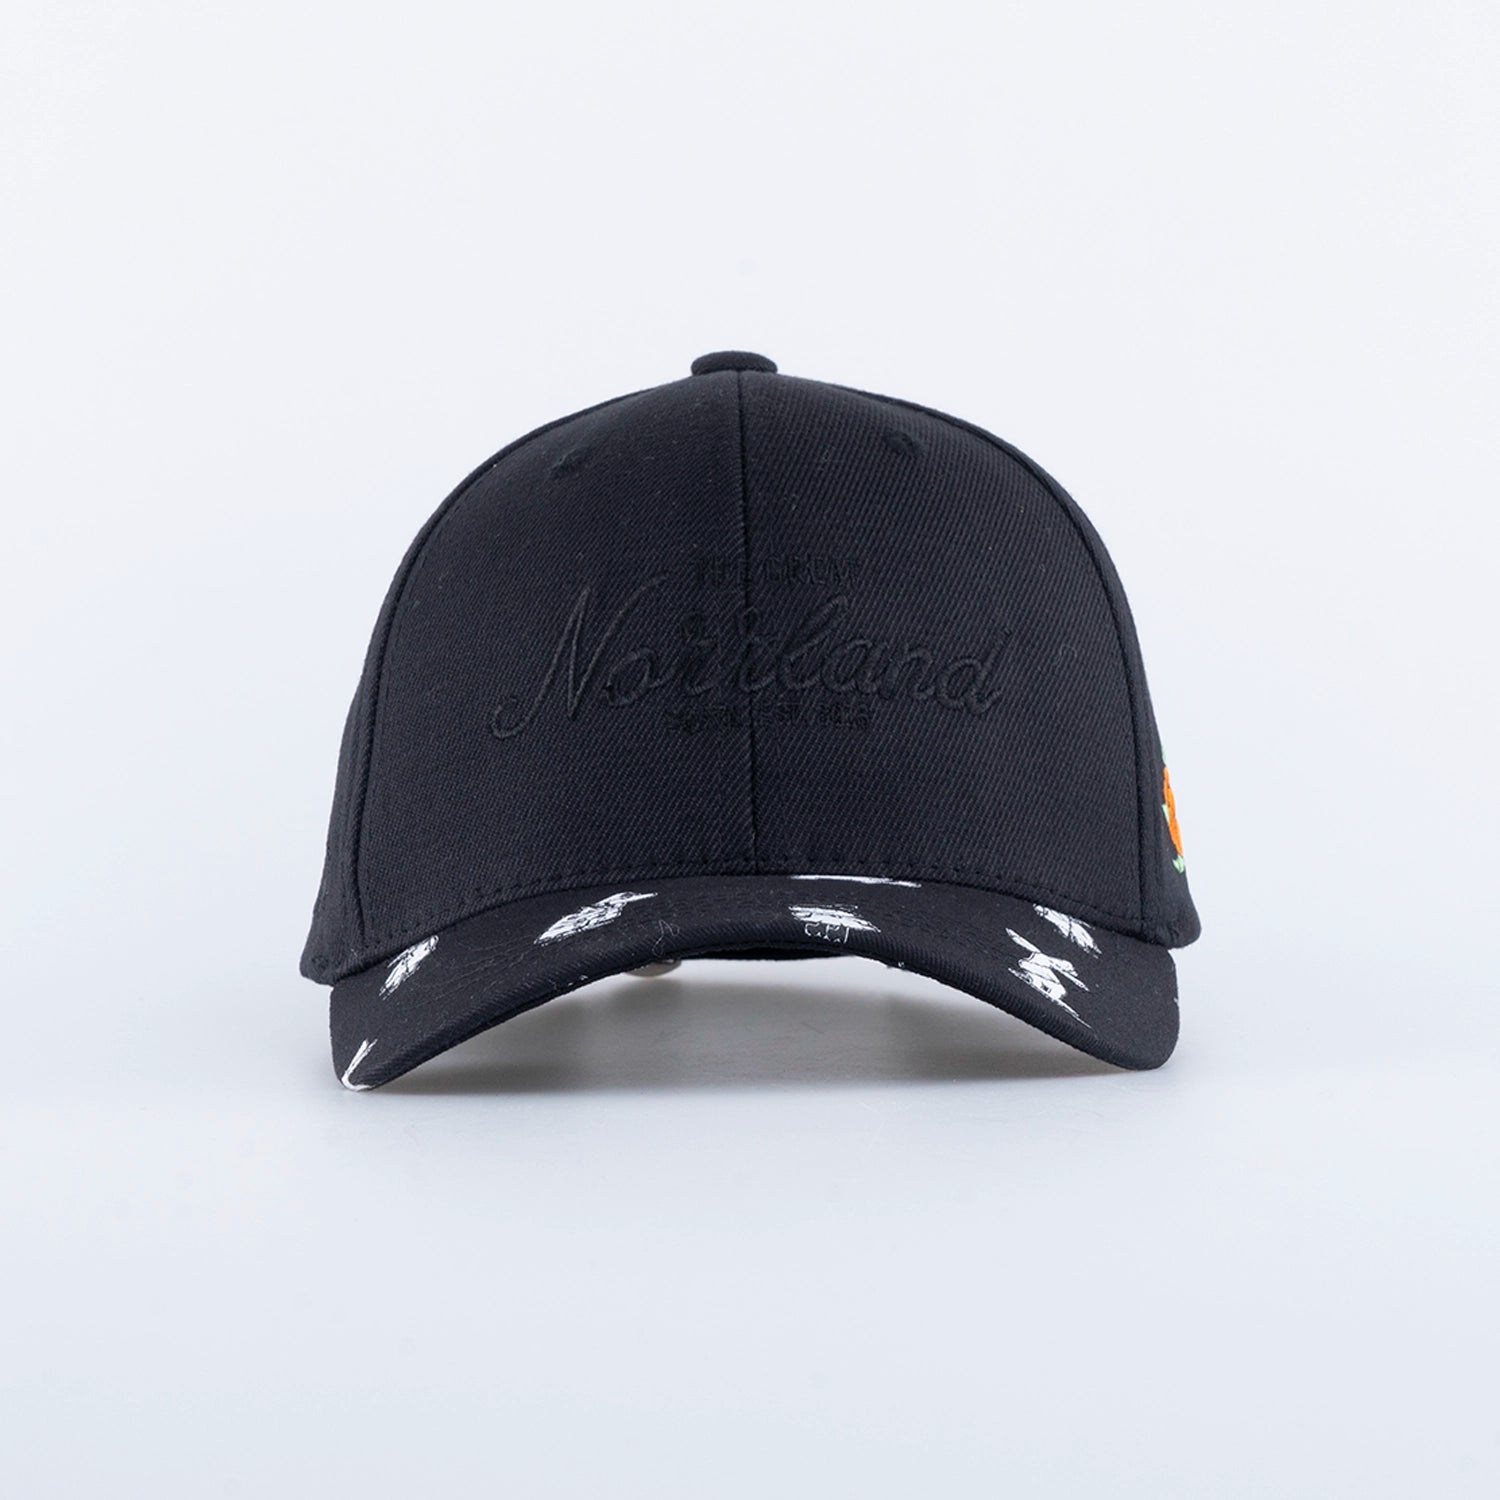 GREAT NORRLAND KIDS CAP  - HOOKED MUMIN ALL BLACK